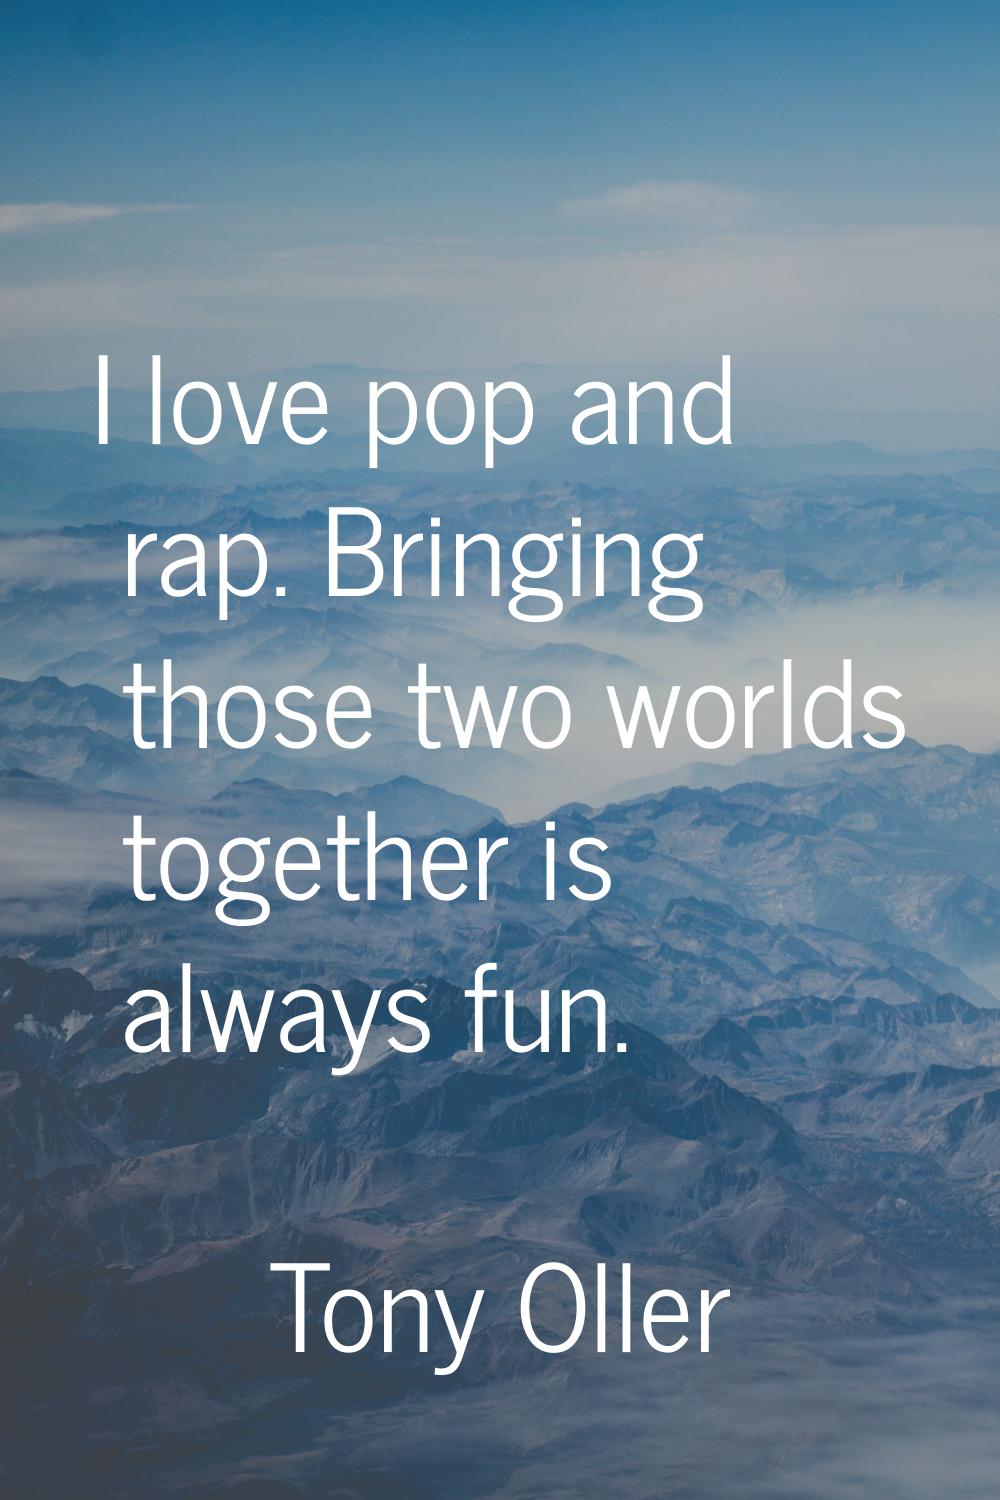 I love pop and rap. Bringing those two worlds together is always fun.